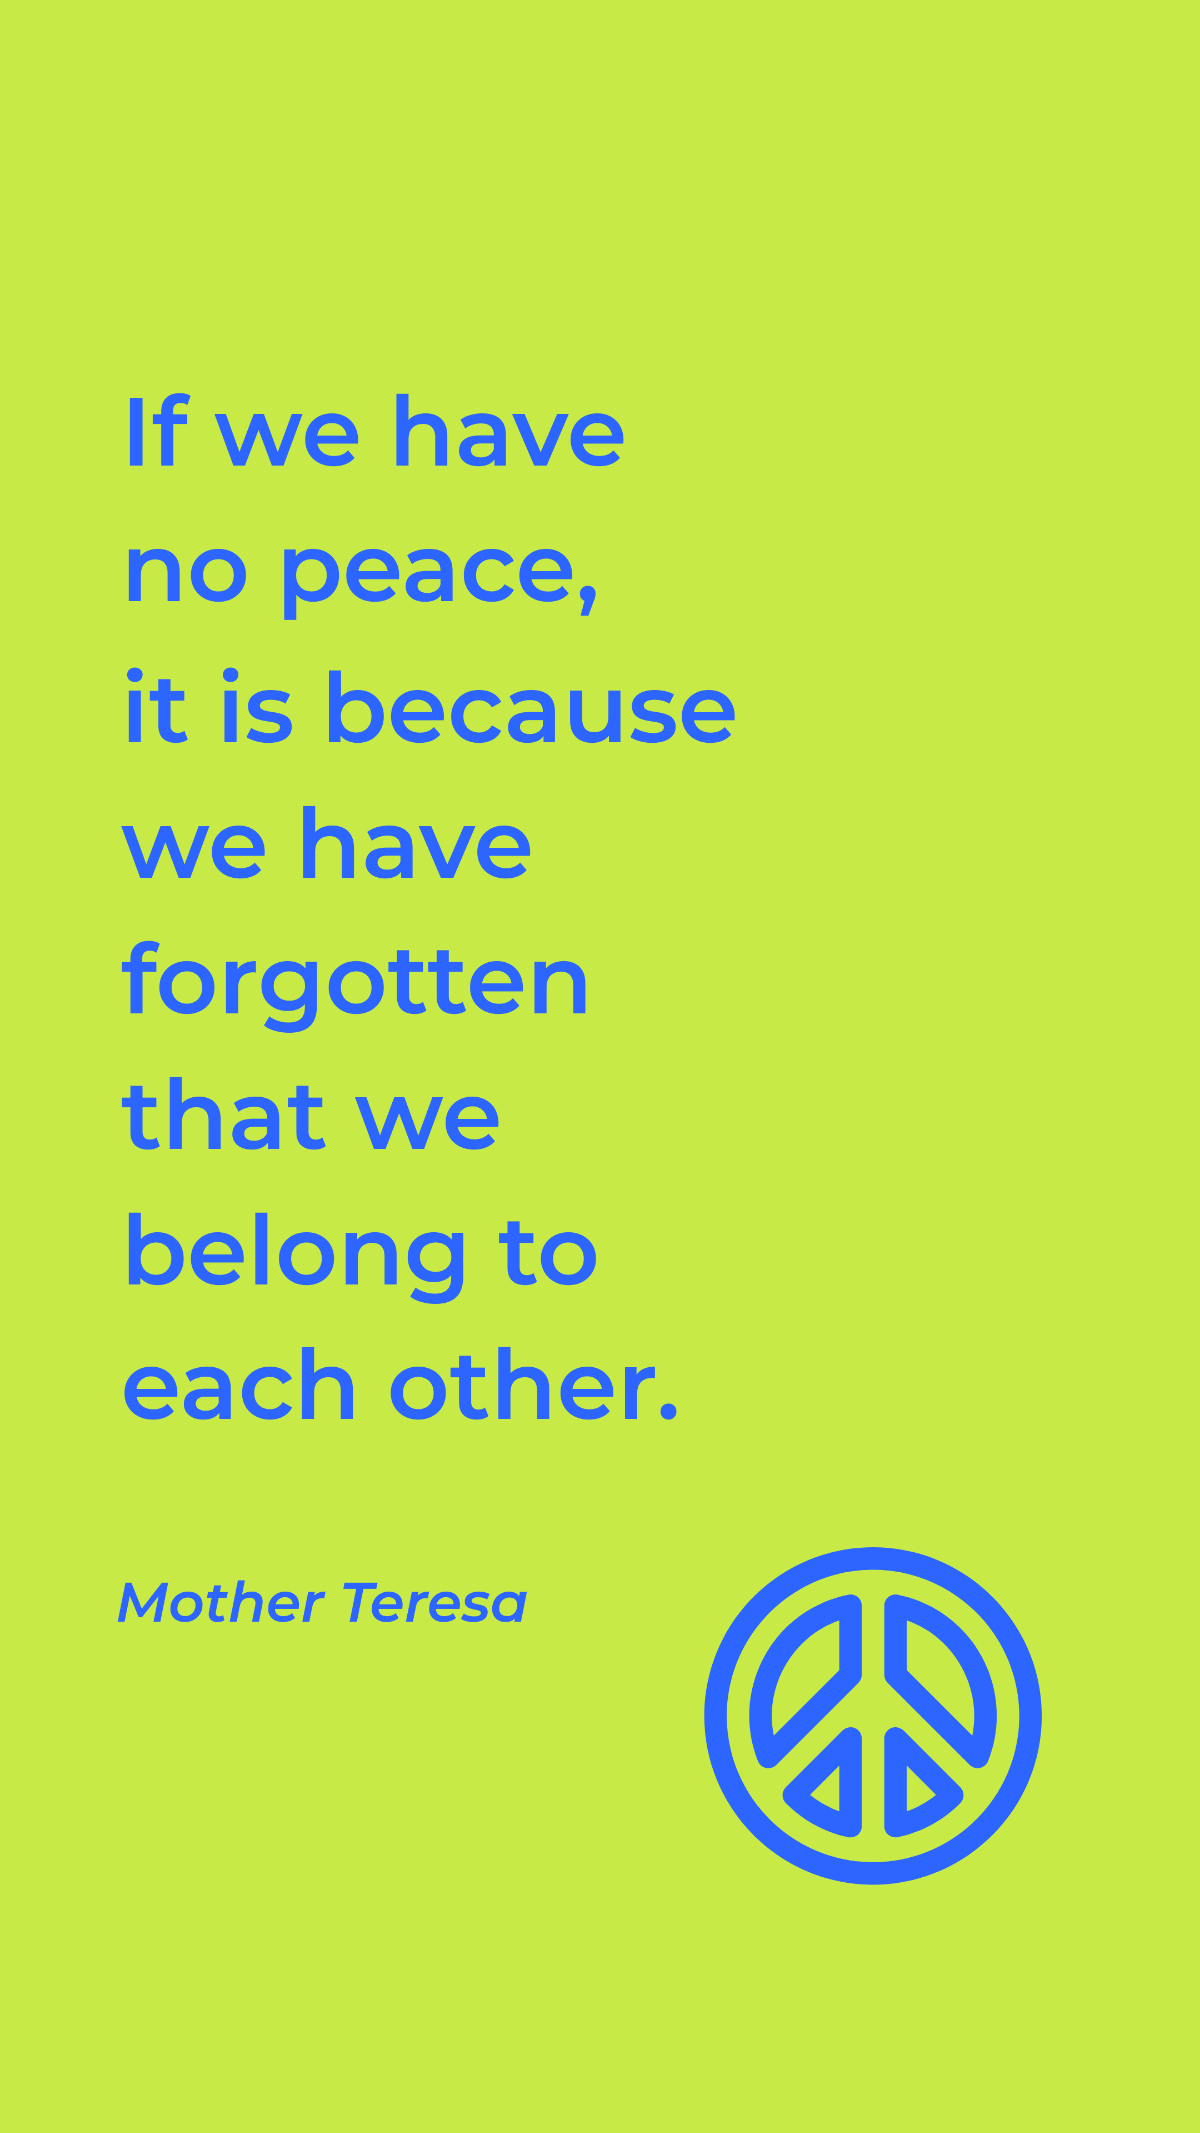 Mother Teresa - If we have no peace, it is because we have forgotten that we belong to each other. Template